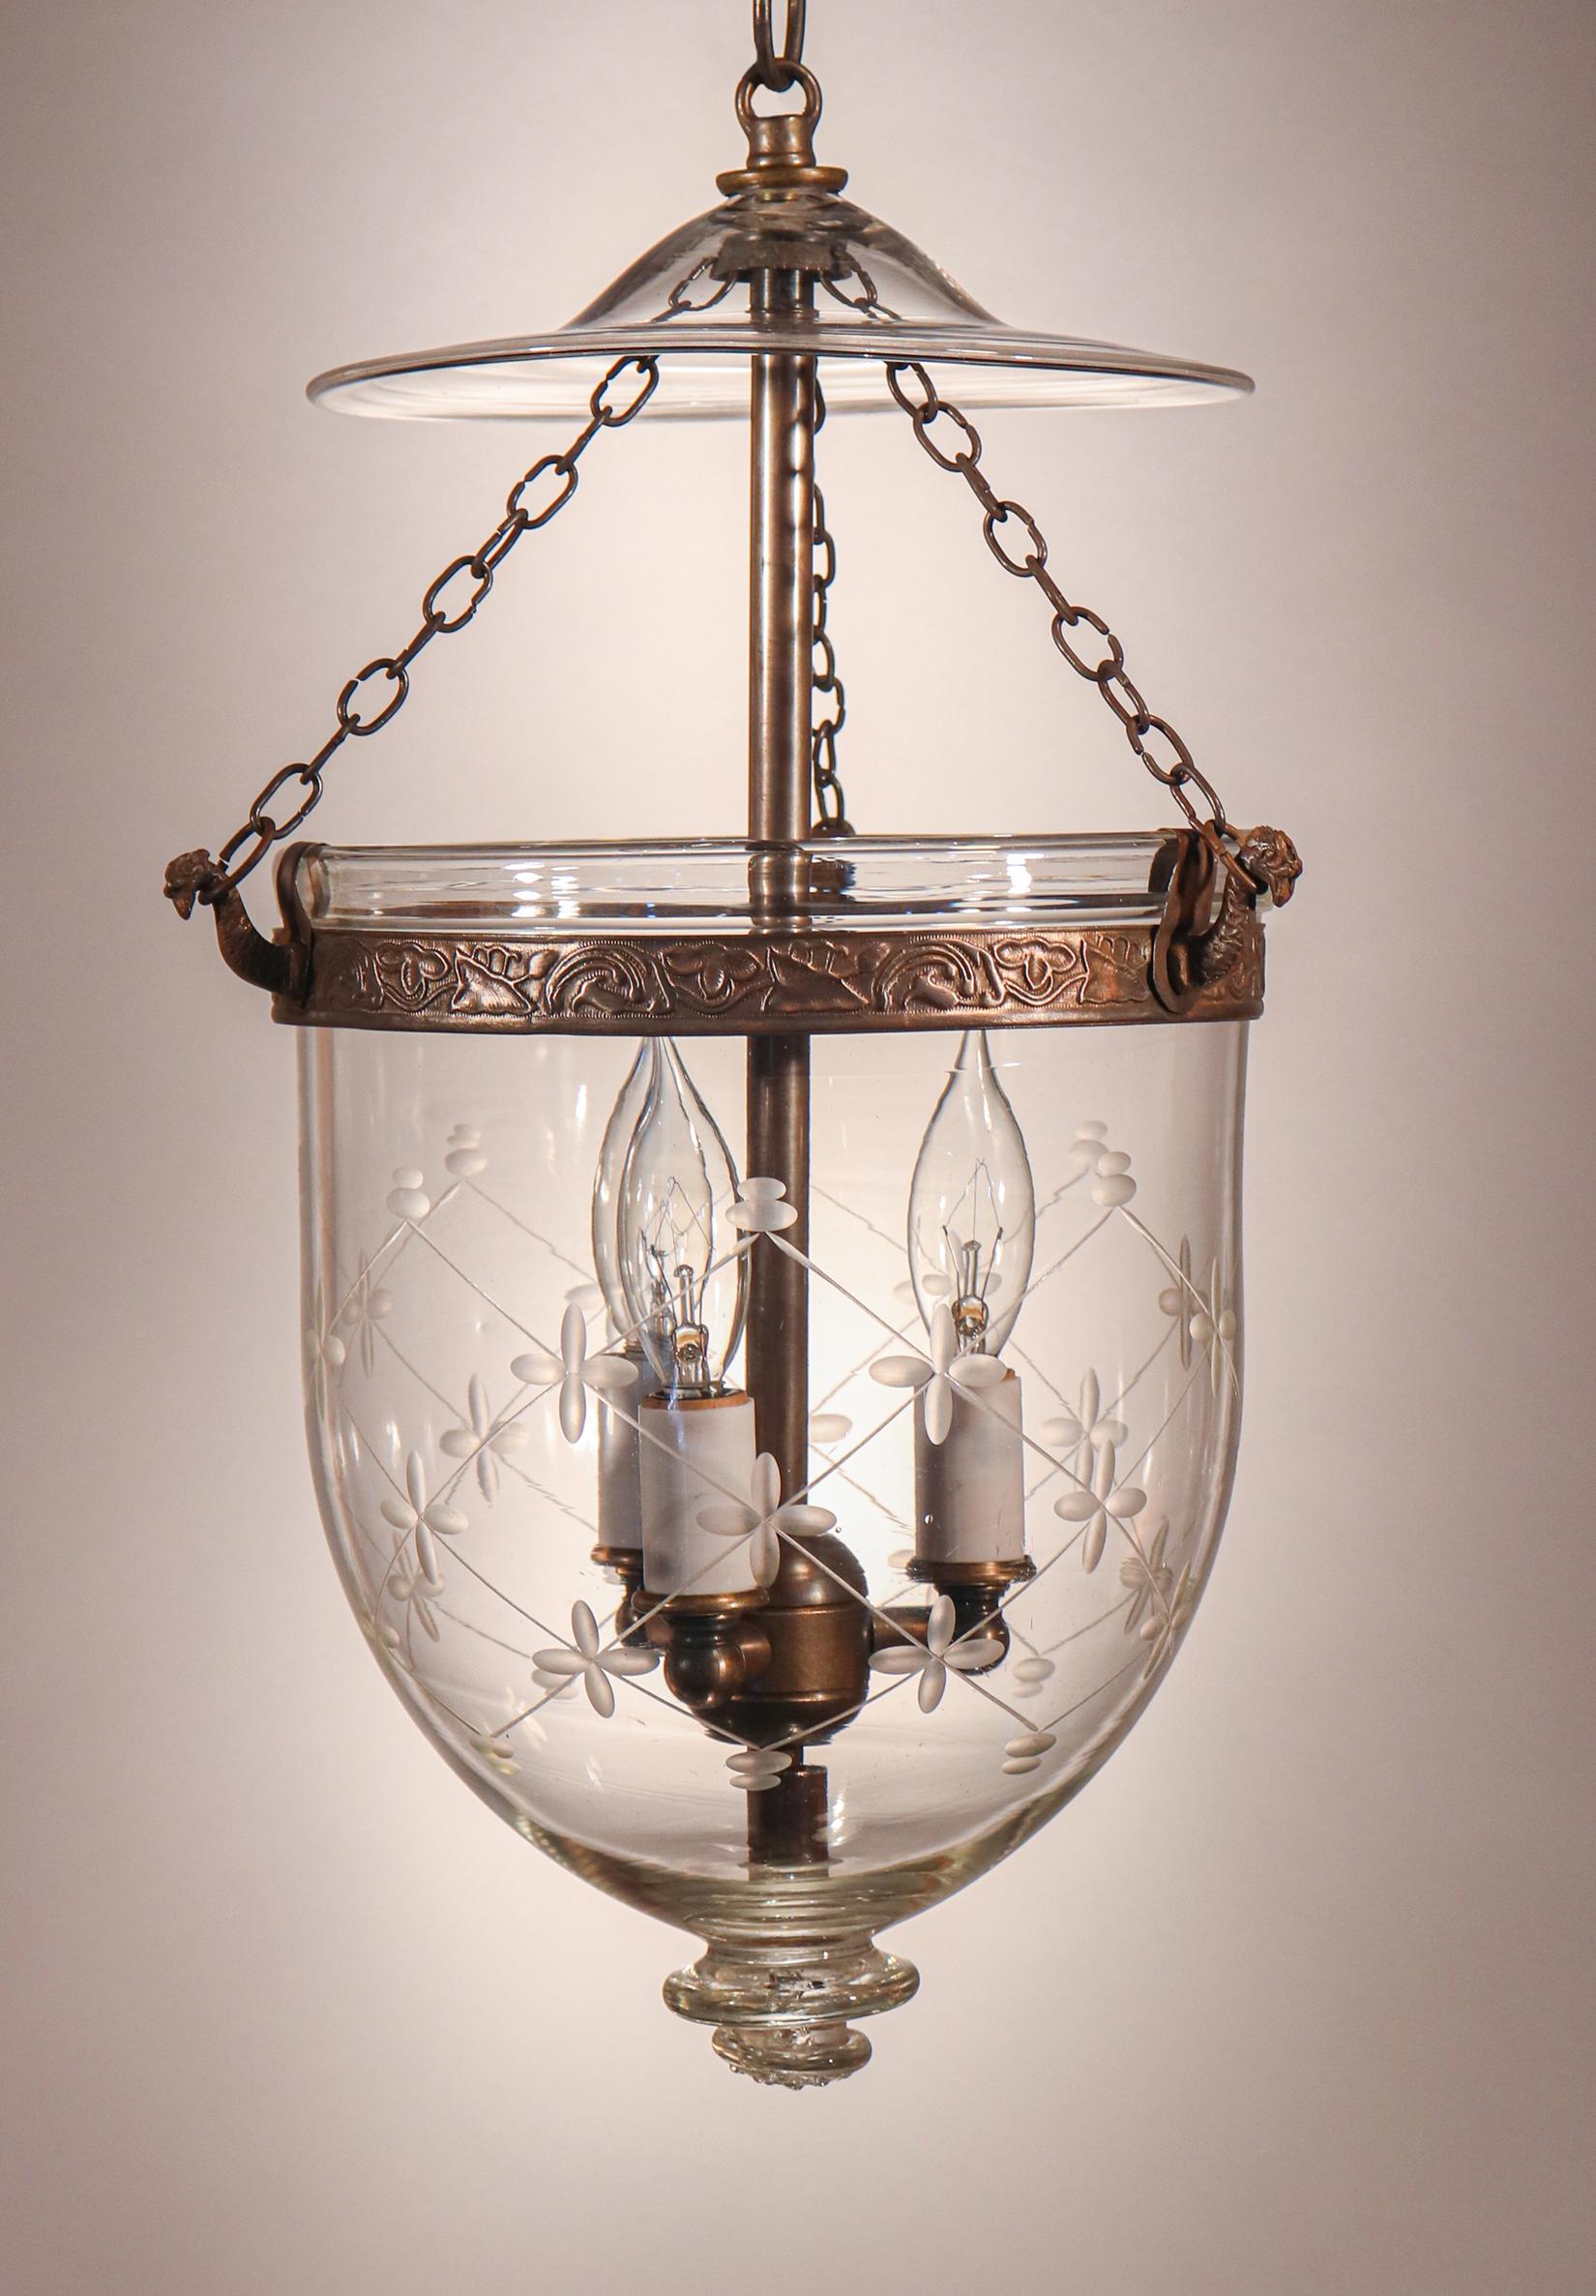 A lovely antique English bell jar lantern with fine quality hand blown glass having an etched trellis motif, circa 1880. Perfect for smaller spaces and/or lower ceiling heights, this lantern features its original smoke bell/lid. The brass band,